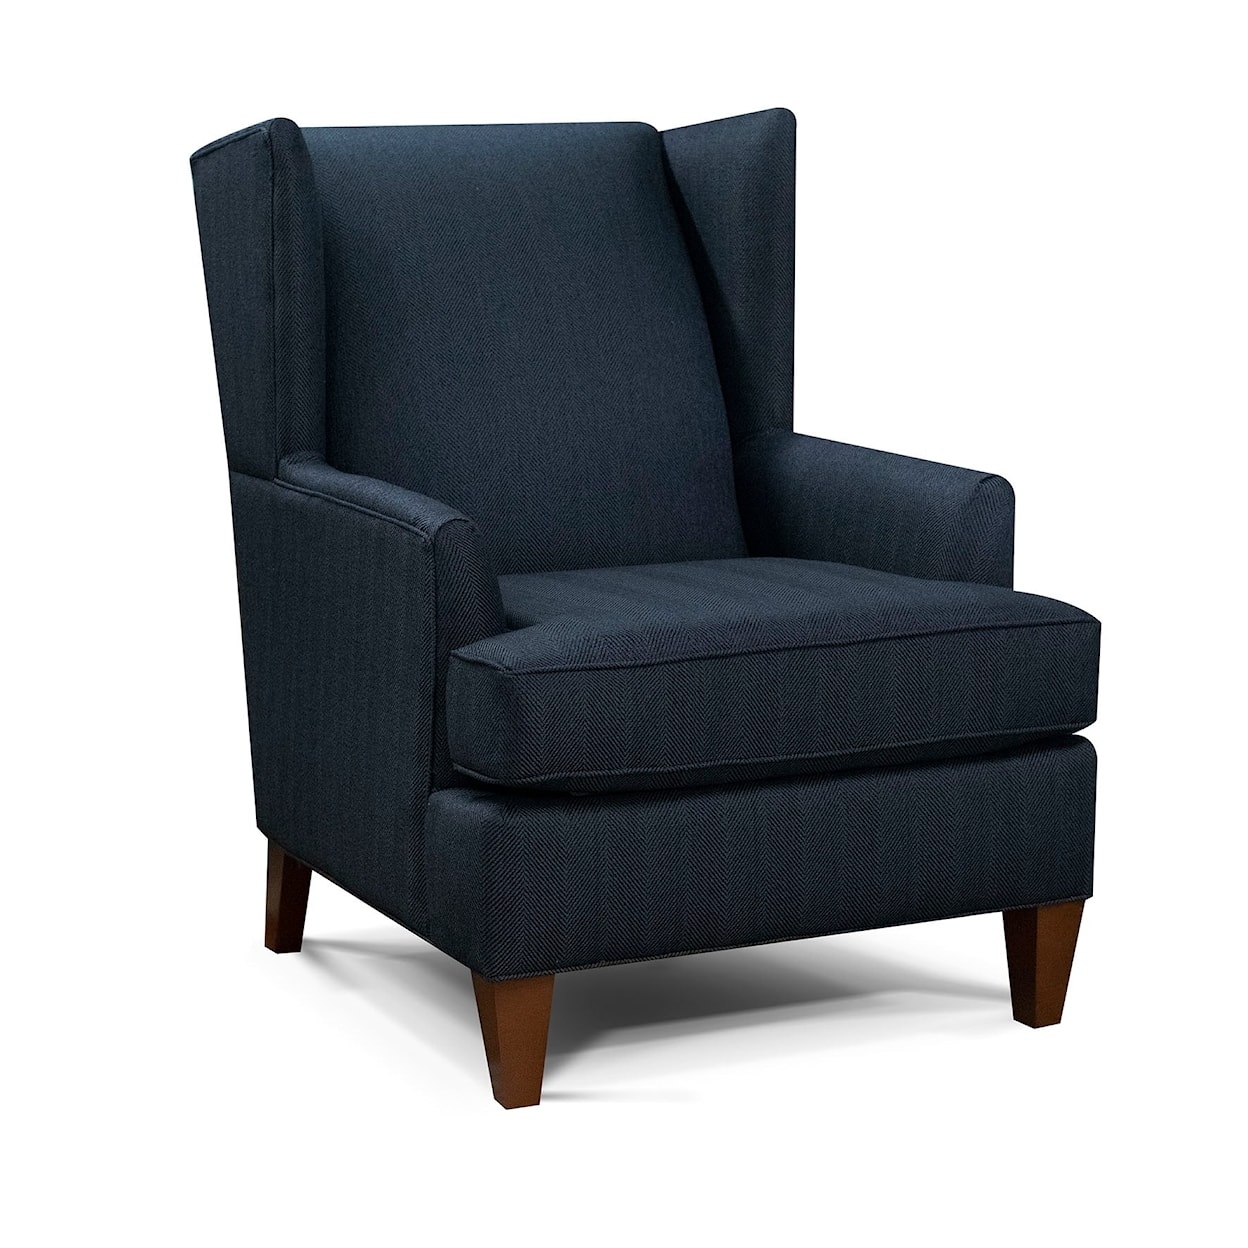 England England Upholstered Wing Chair